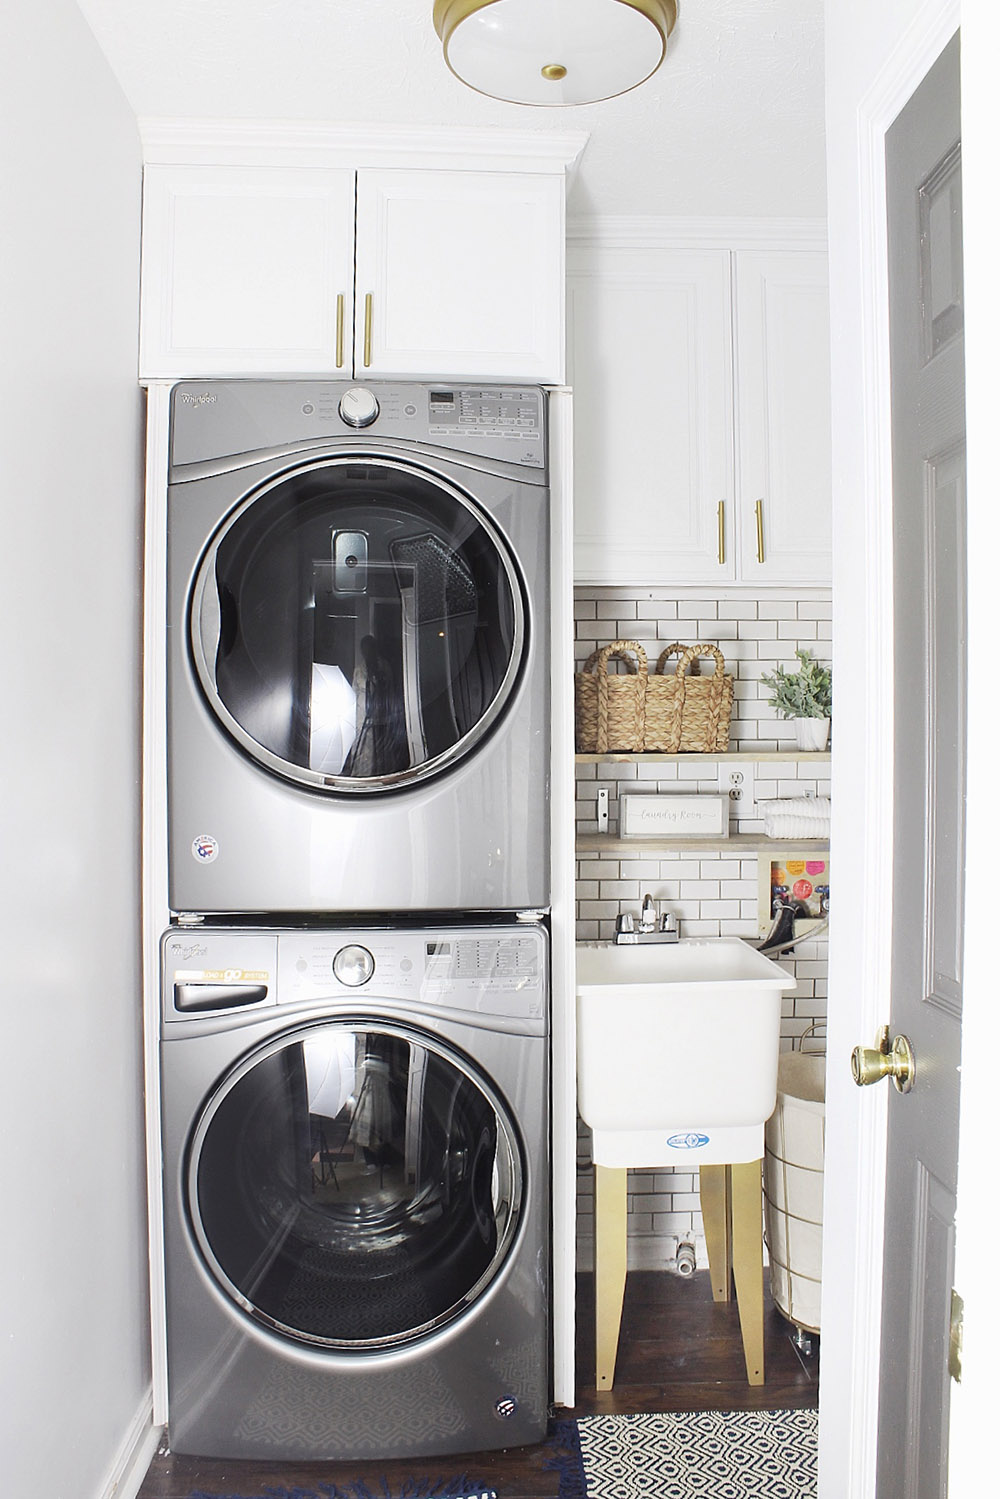 An updated laundry room with white cabinets, gold hardware, and a new washer and dryer.